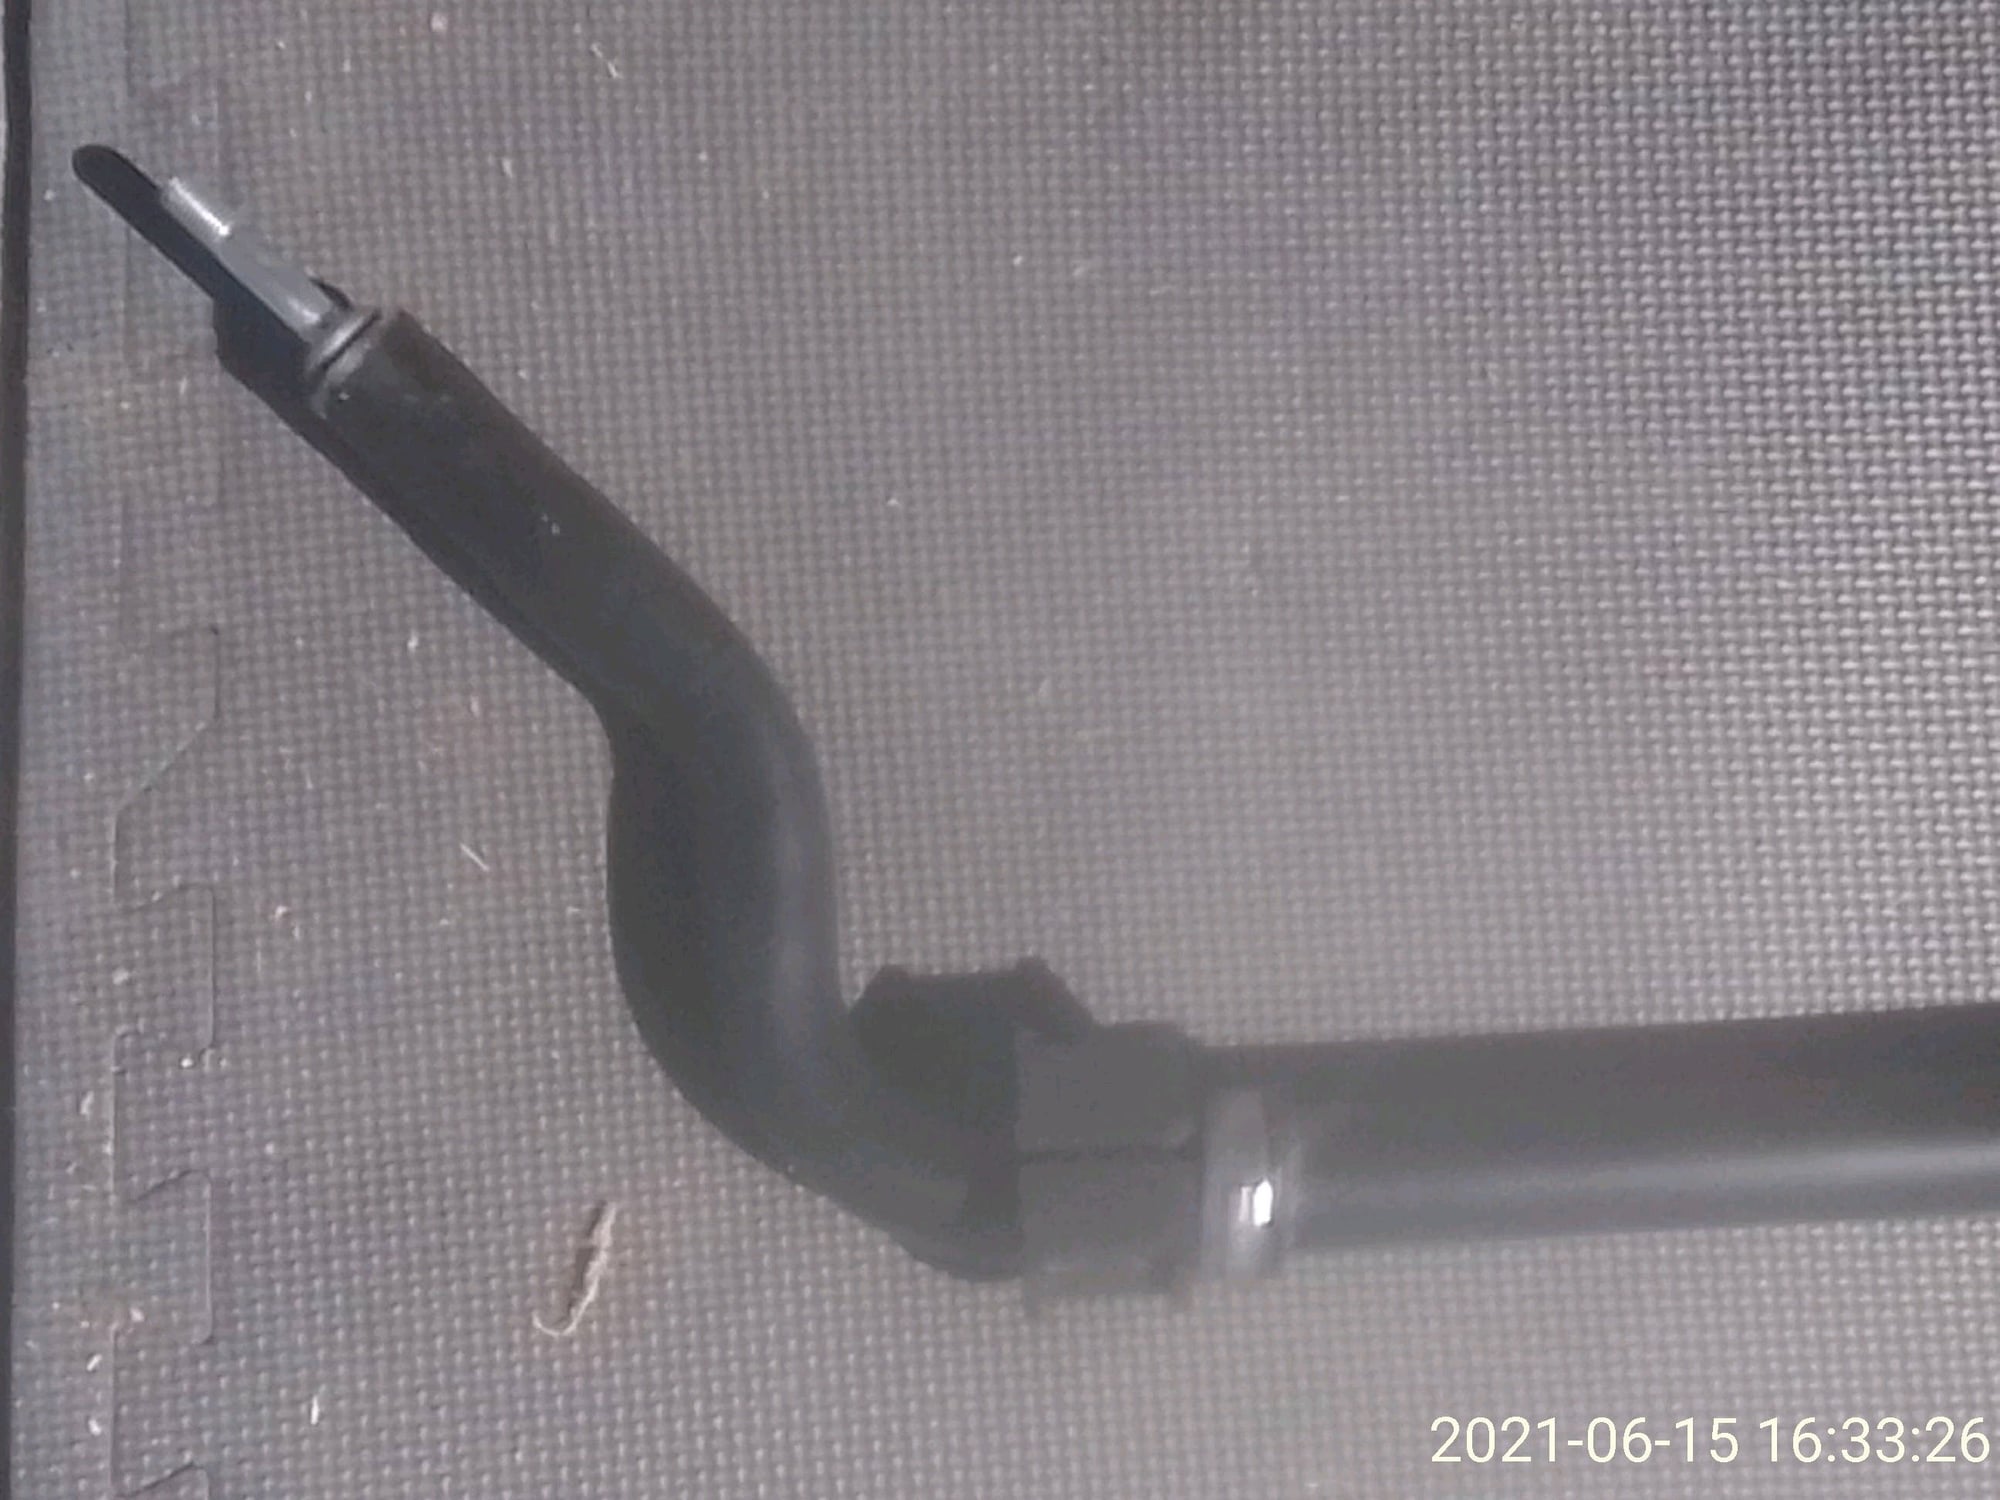 Steering/Suspension - FD OEM Front Sway Bar - Used - 1993 to 1999 Mazda RX-7 - San Jose, CA 95121, United States